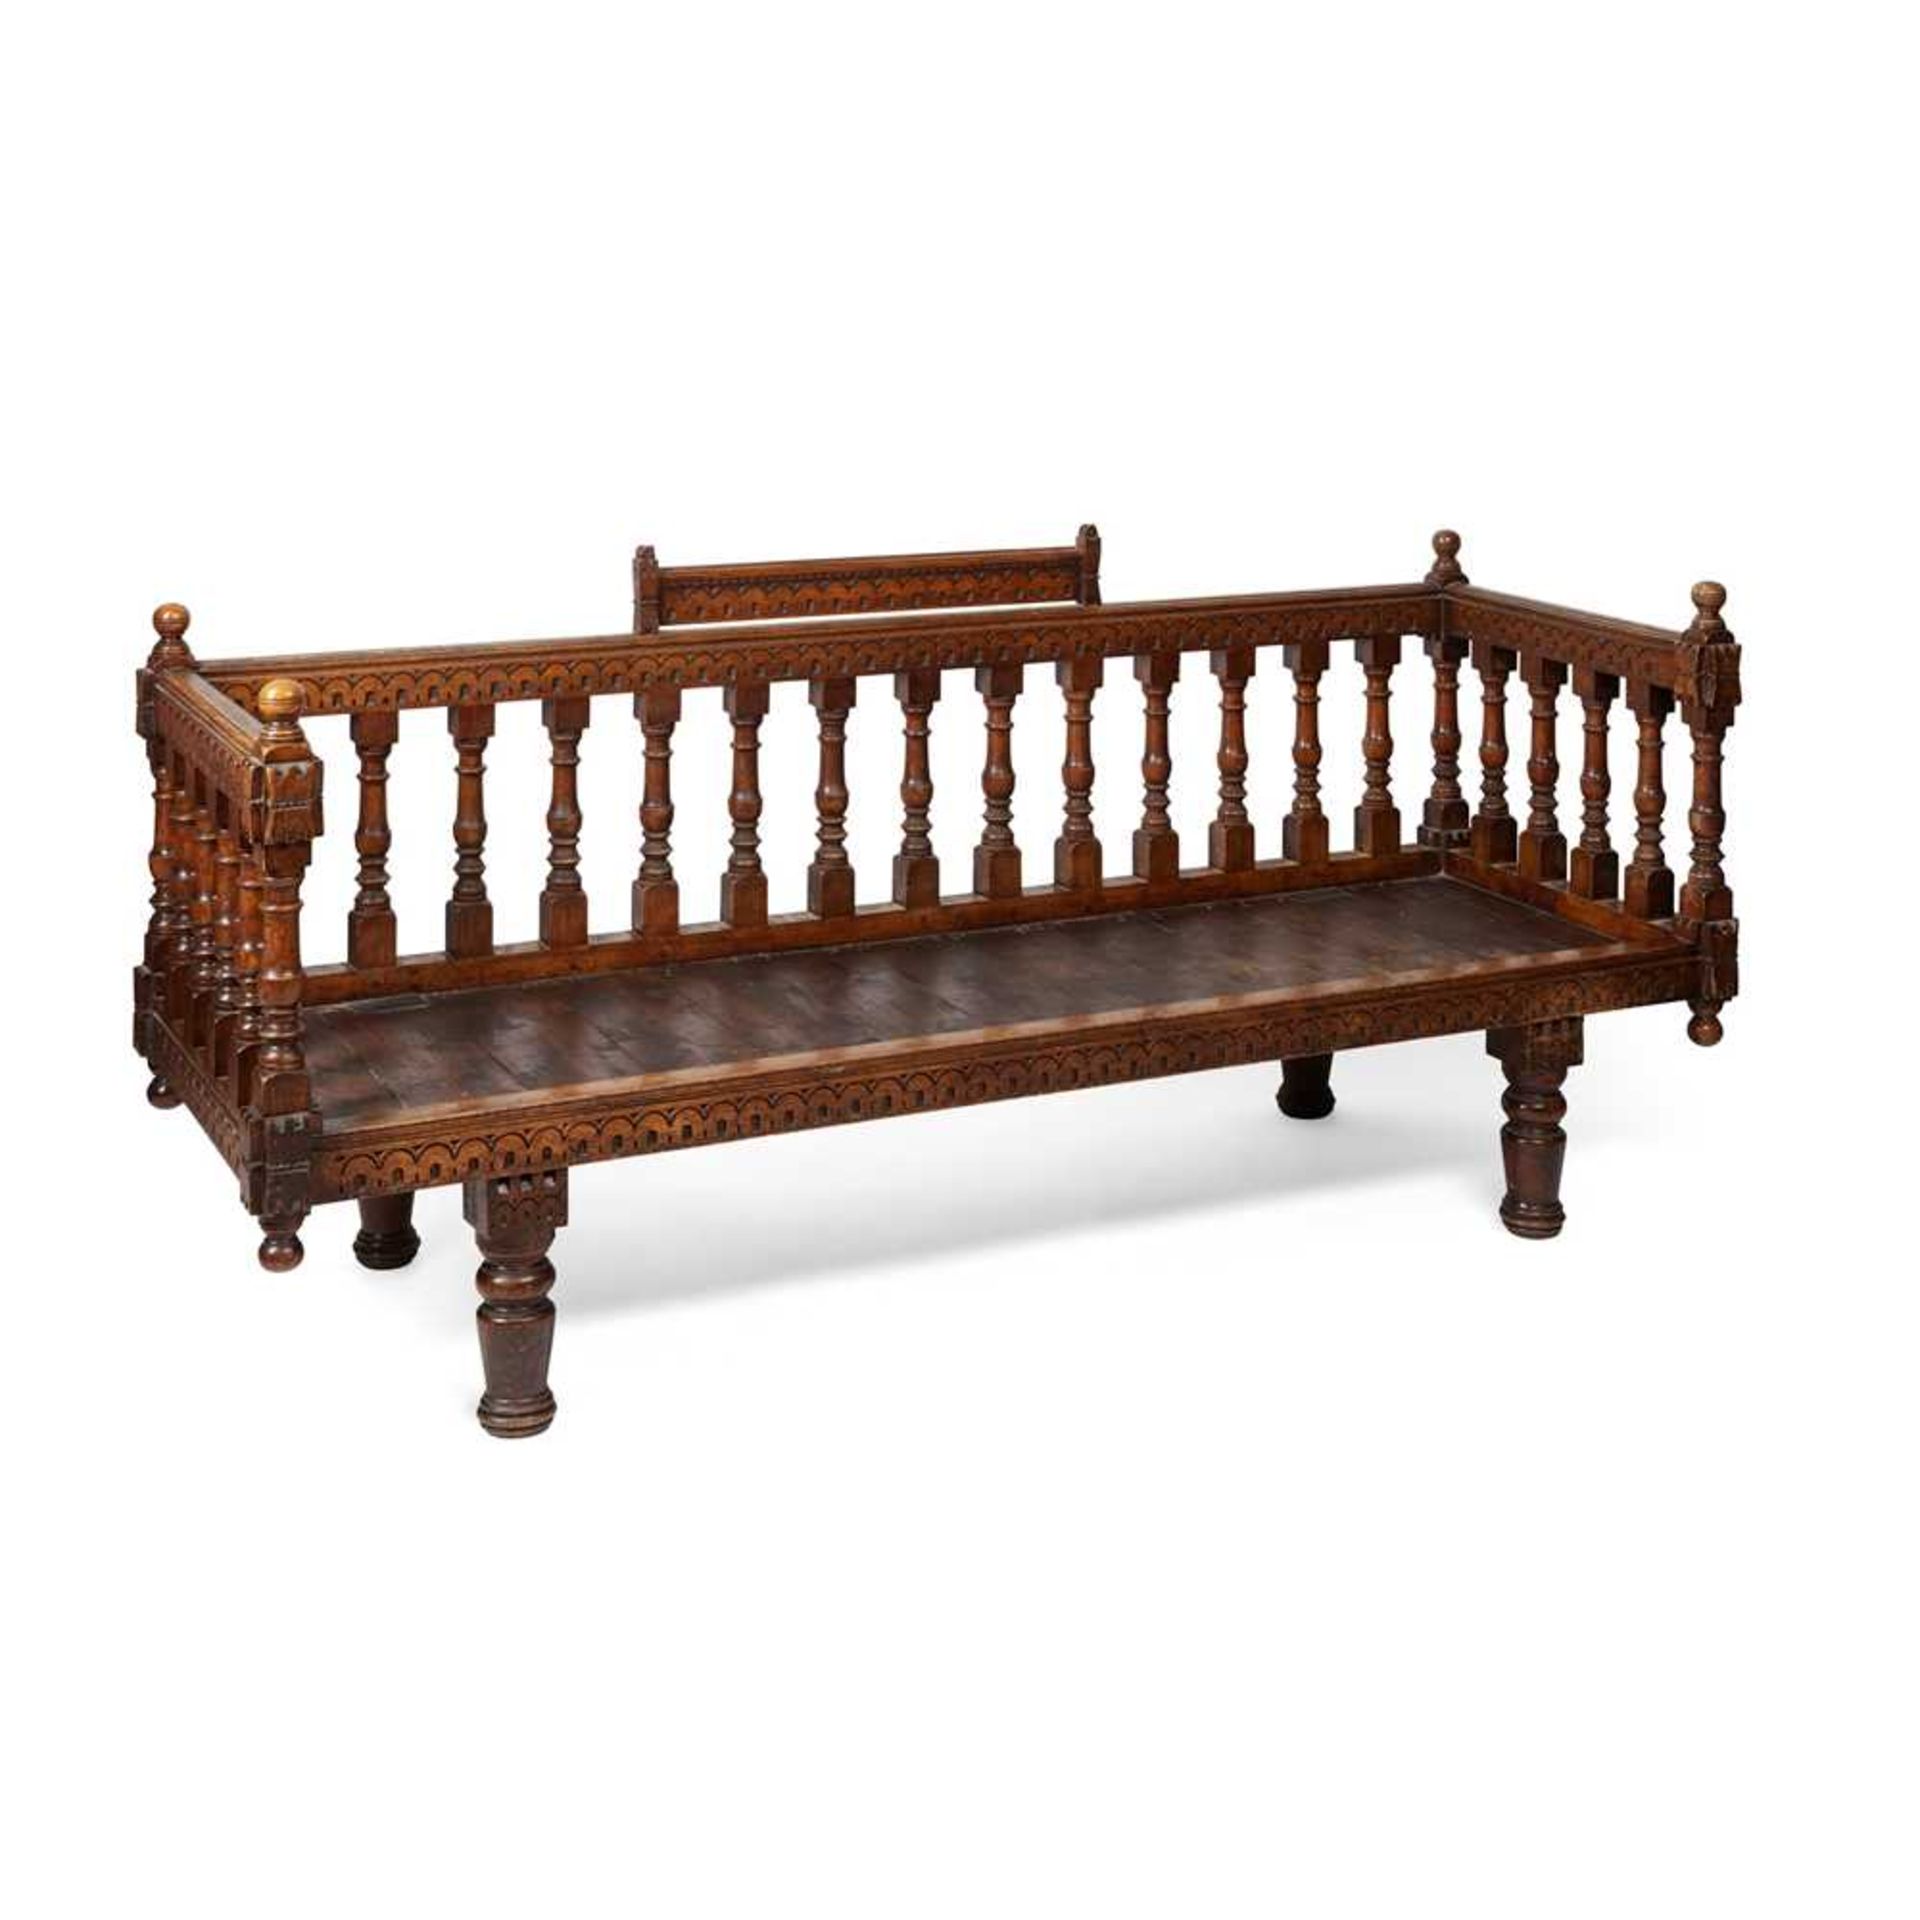 ENGLISH GOTHIC REVIVAL DAYBED, CIRCA 1890 - Image 2 of 2